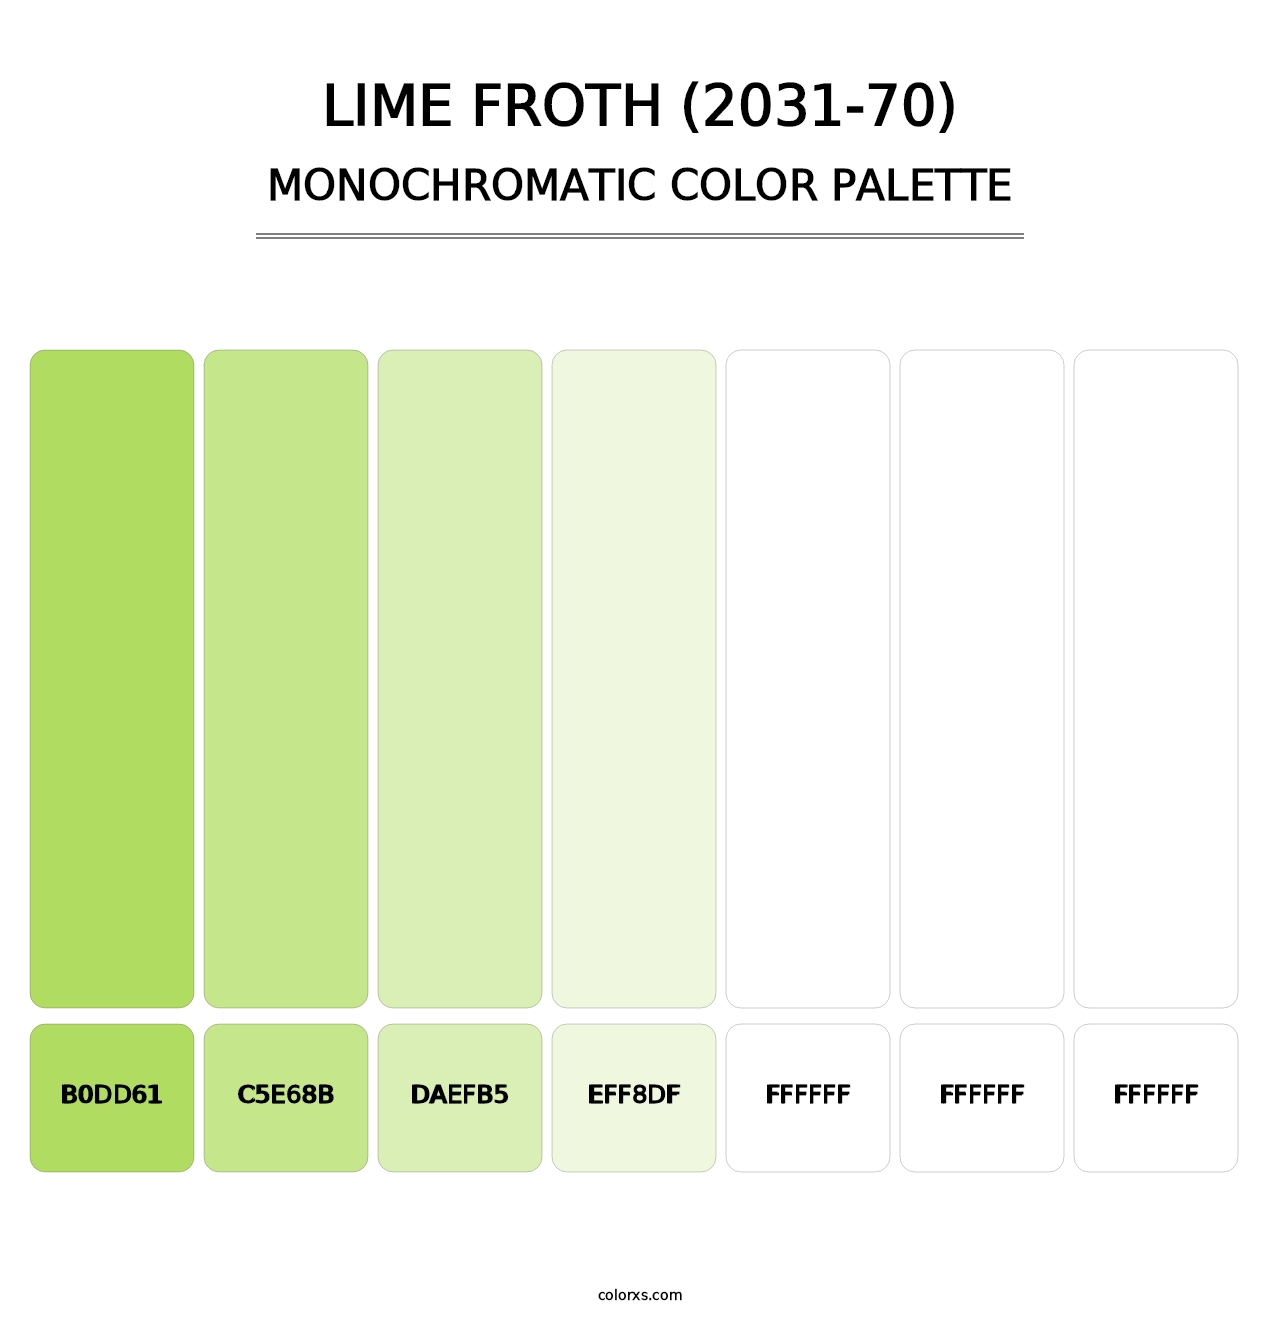 Lime Froth (2031-70) - Monochromatic Color Palette